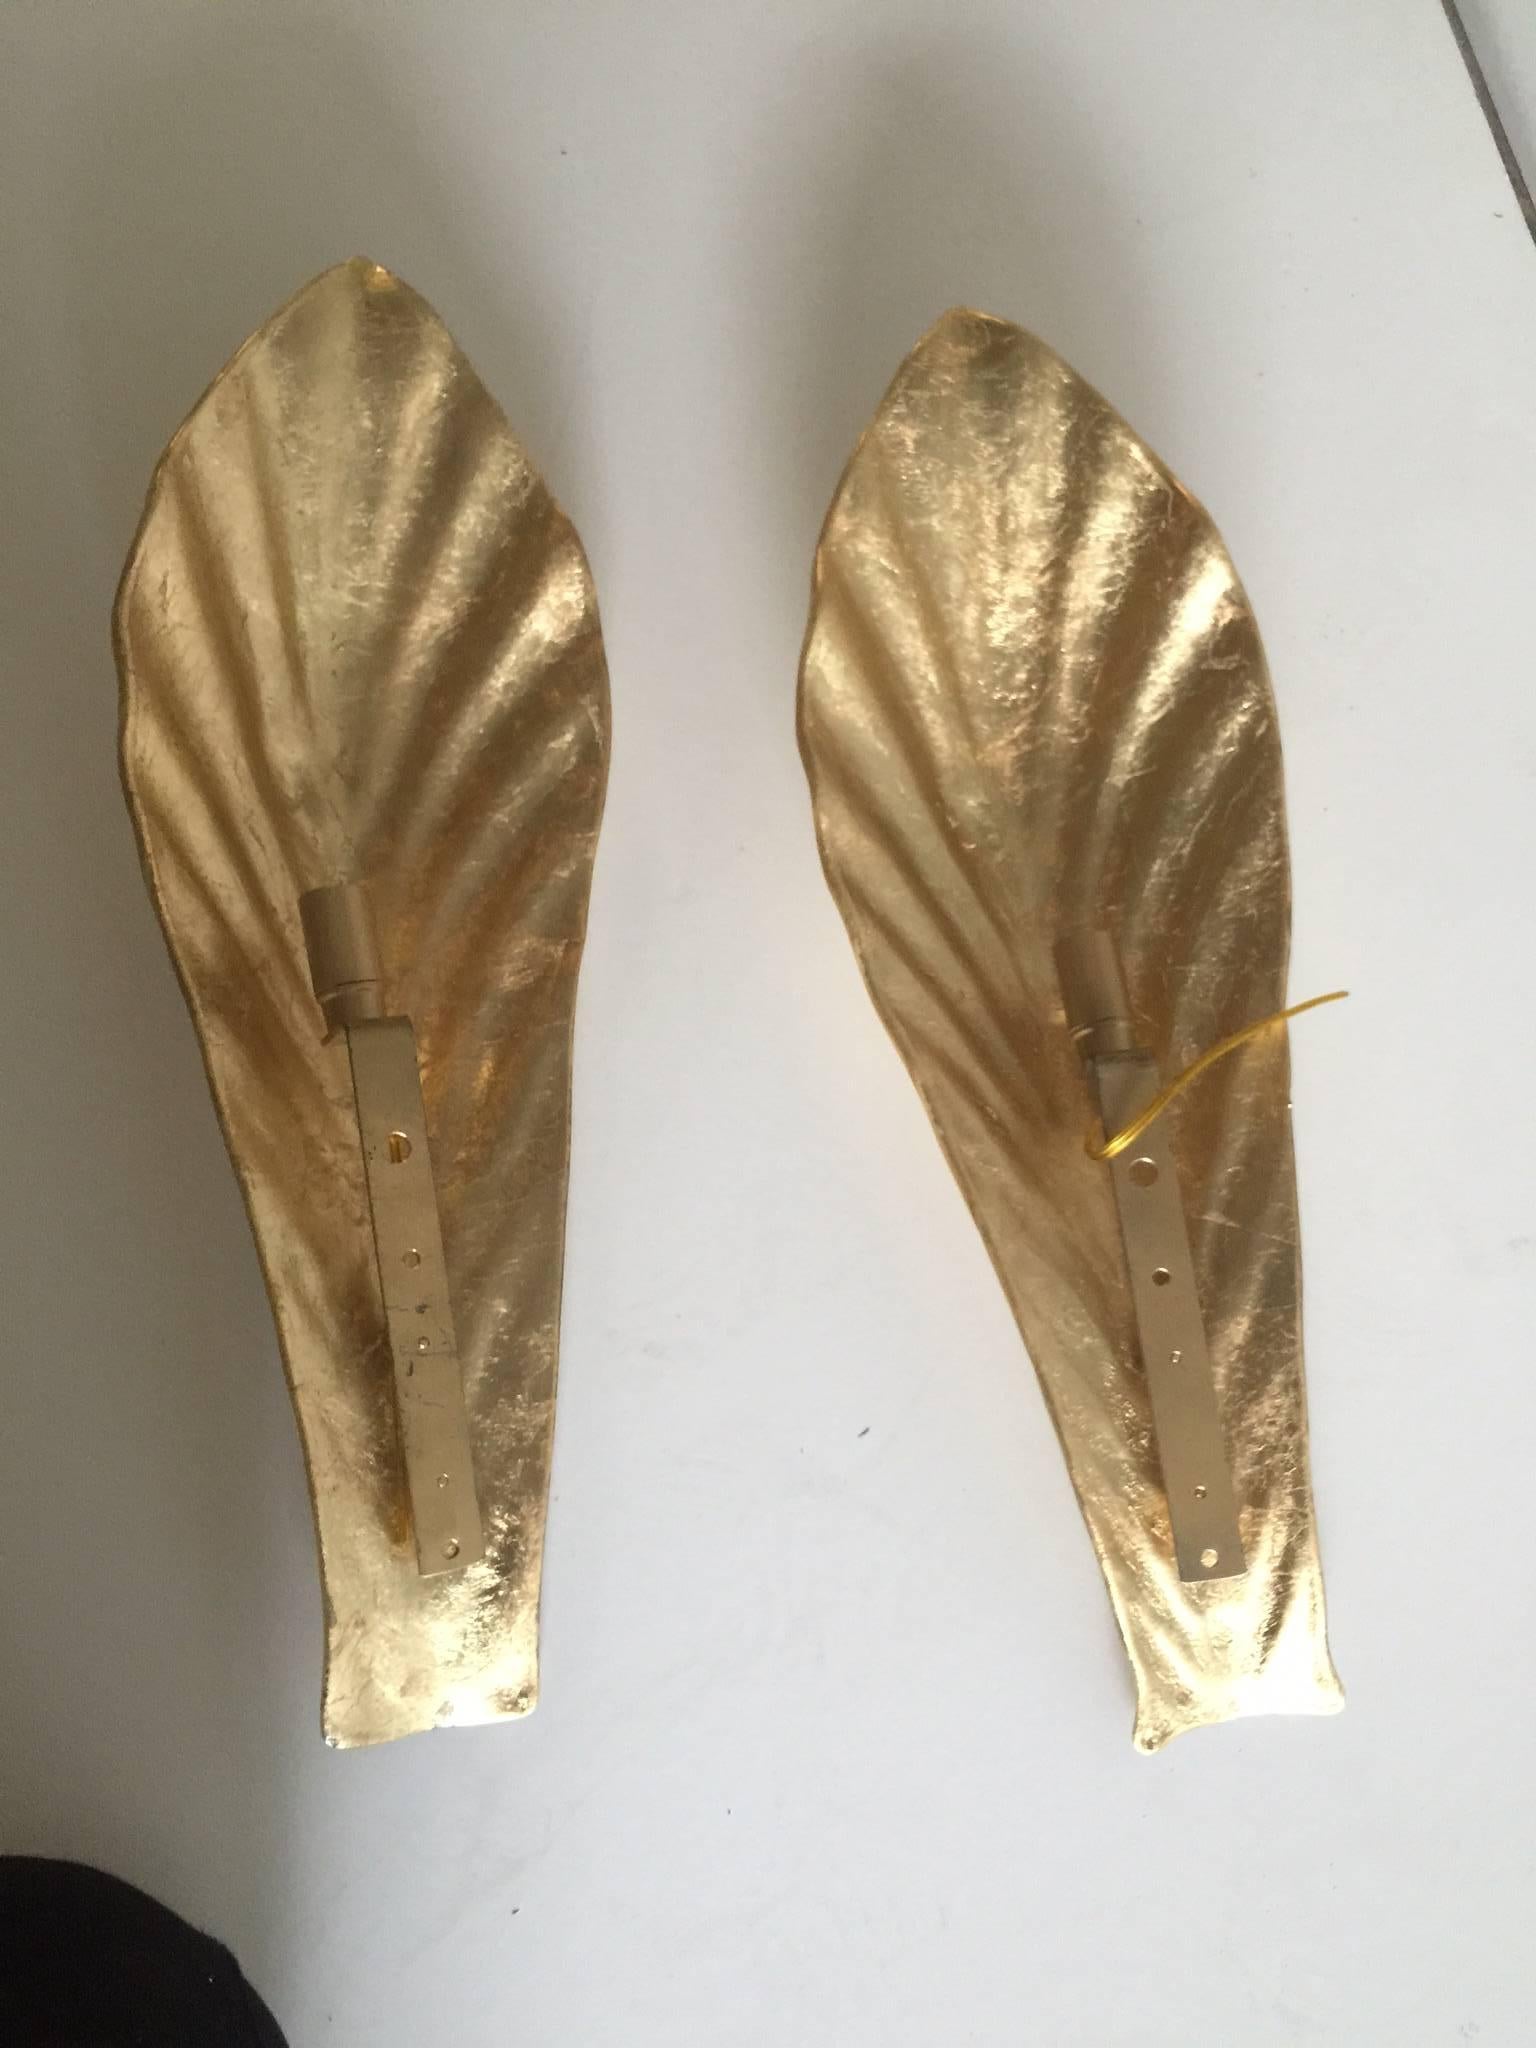 A vintage pair of Italian golden color Murano glass leaf sconces. There is a second pair of sconces available for purchase separately.